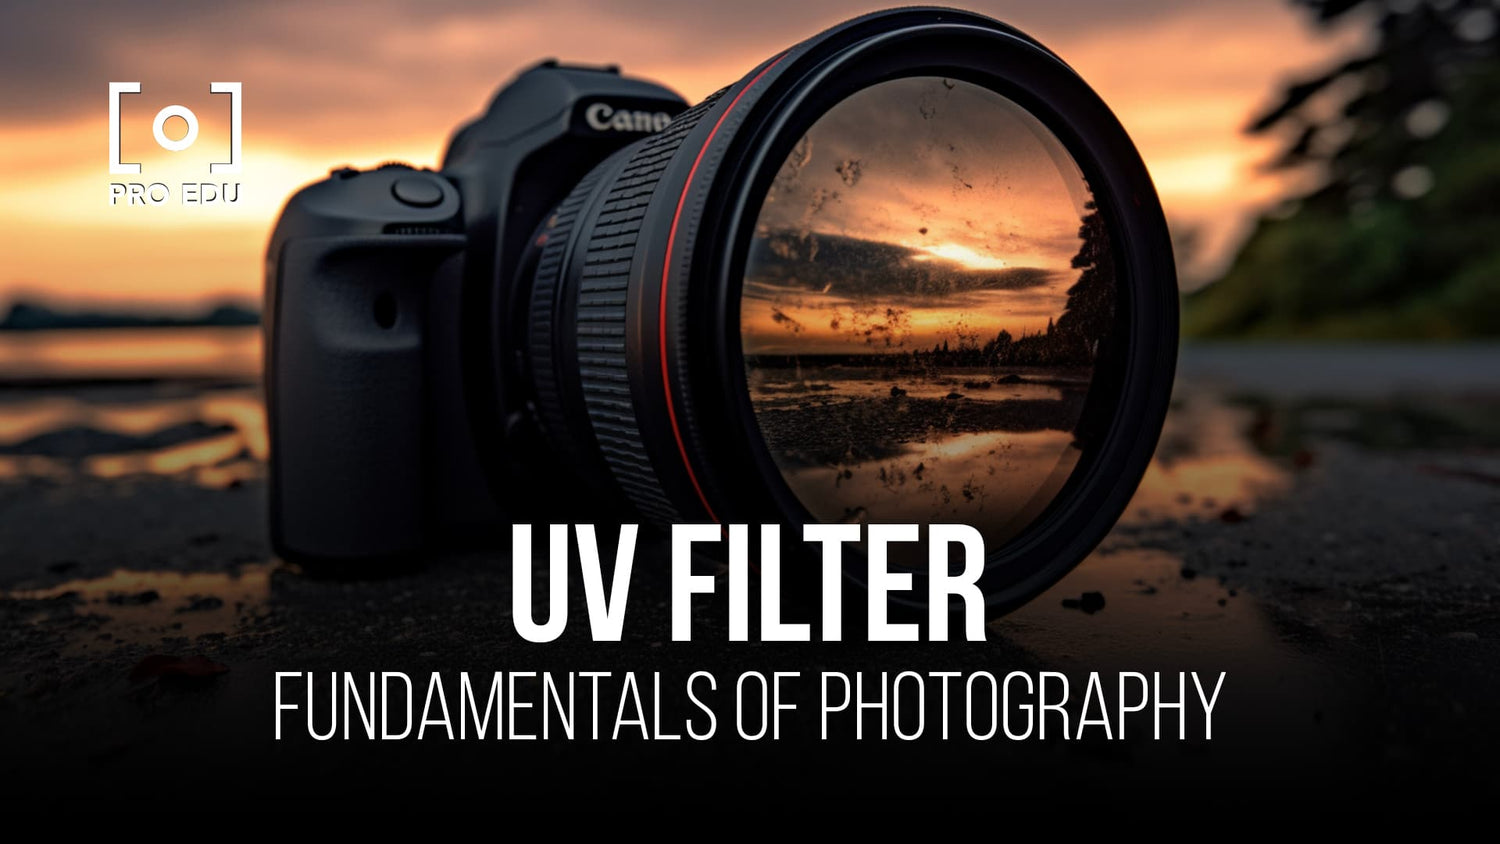 Protecting your lens and enhancing photography with a UV filter